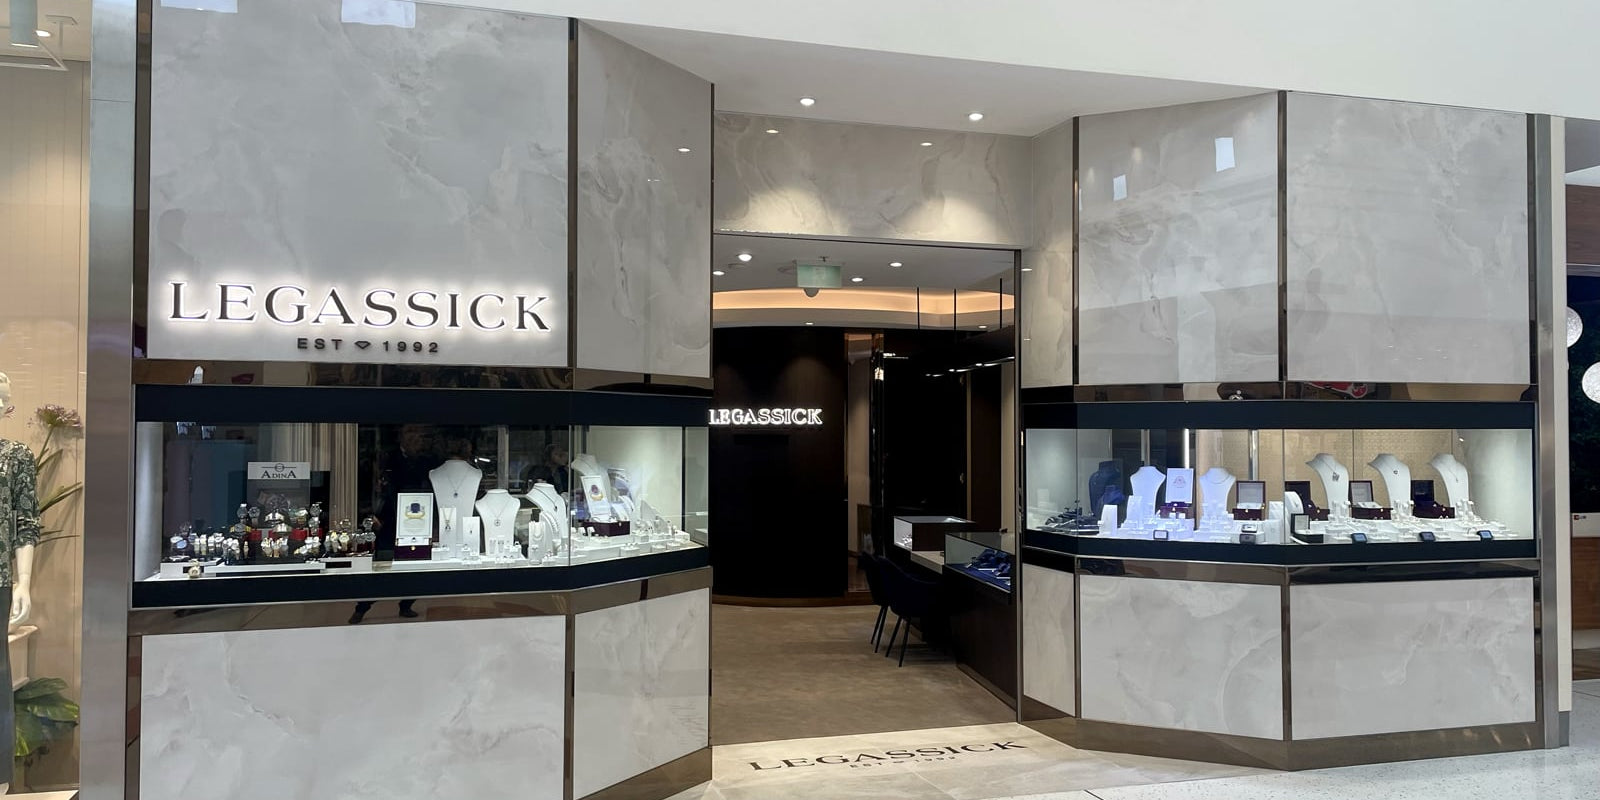 LeGassick Jewellery Store Runaway Bay Centre, Gold Coast, Australia, is a stunning showcase of the world's finest diamond engagement rings and jewellery. If you are after something special for a loved one or want to spoil yourself, stop by and fall in love.